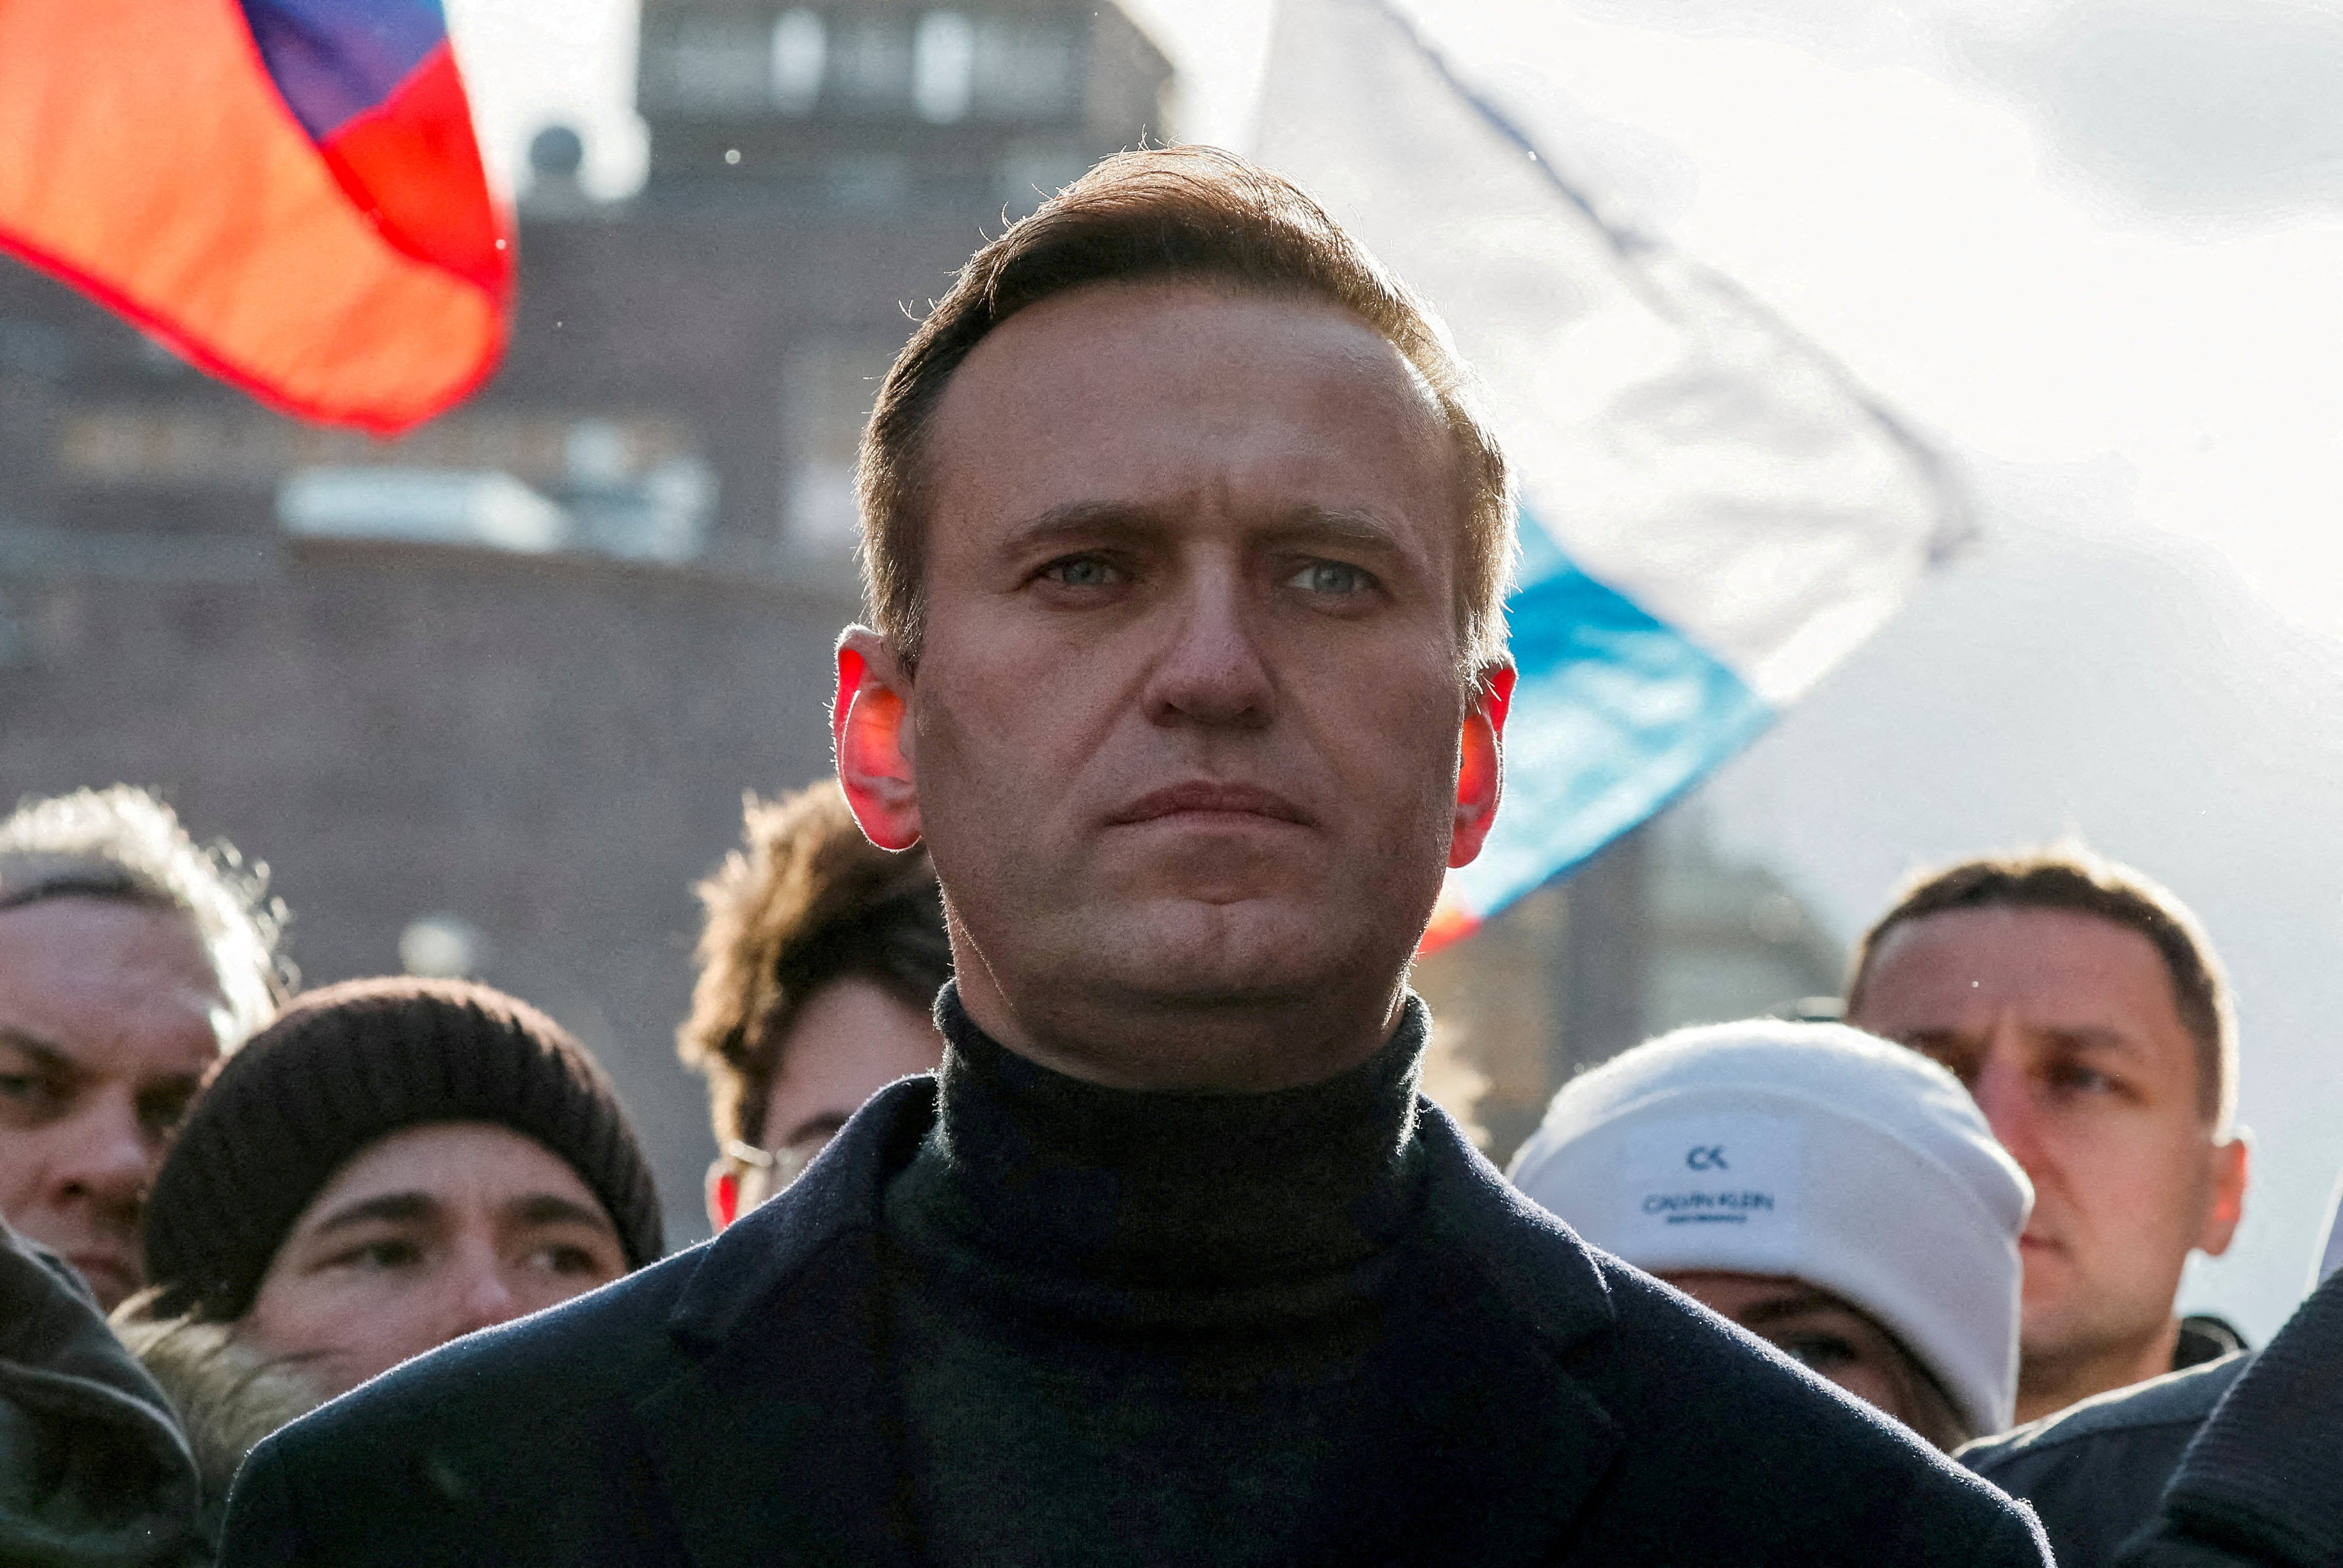 Alexei Navalny was detained in January 2021.